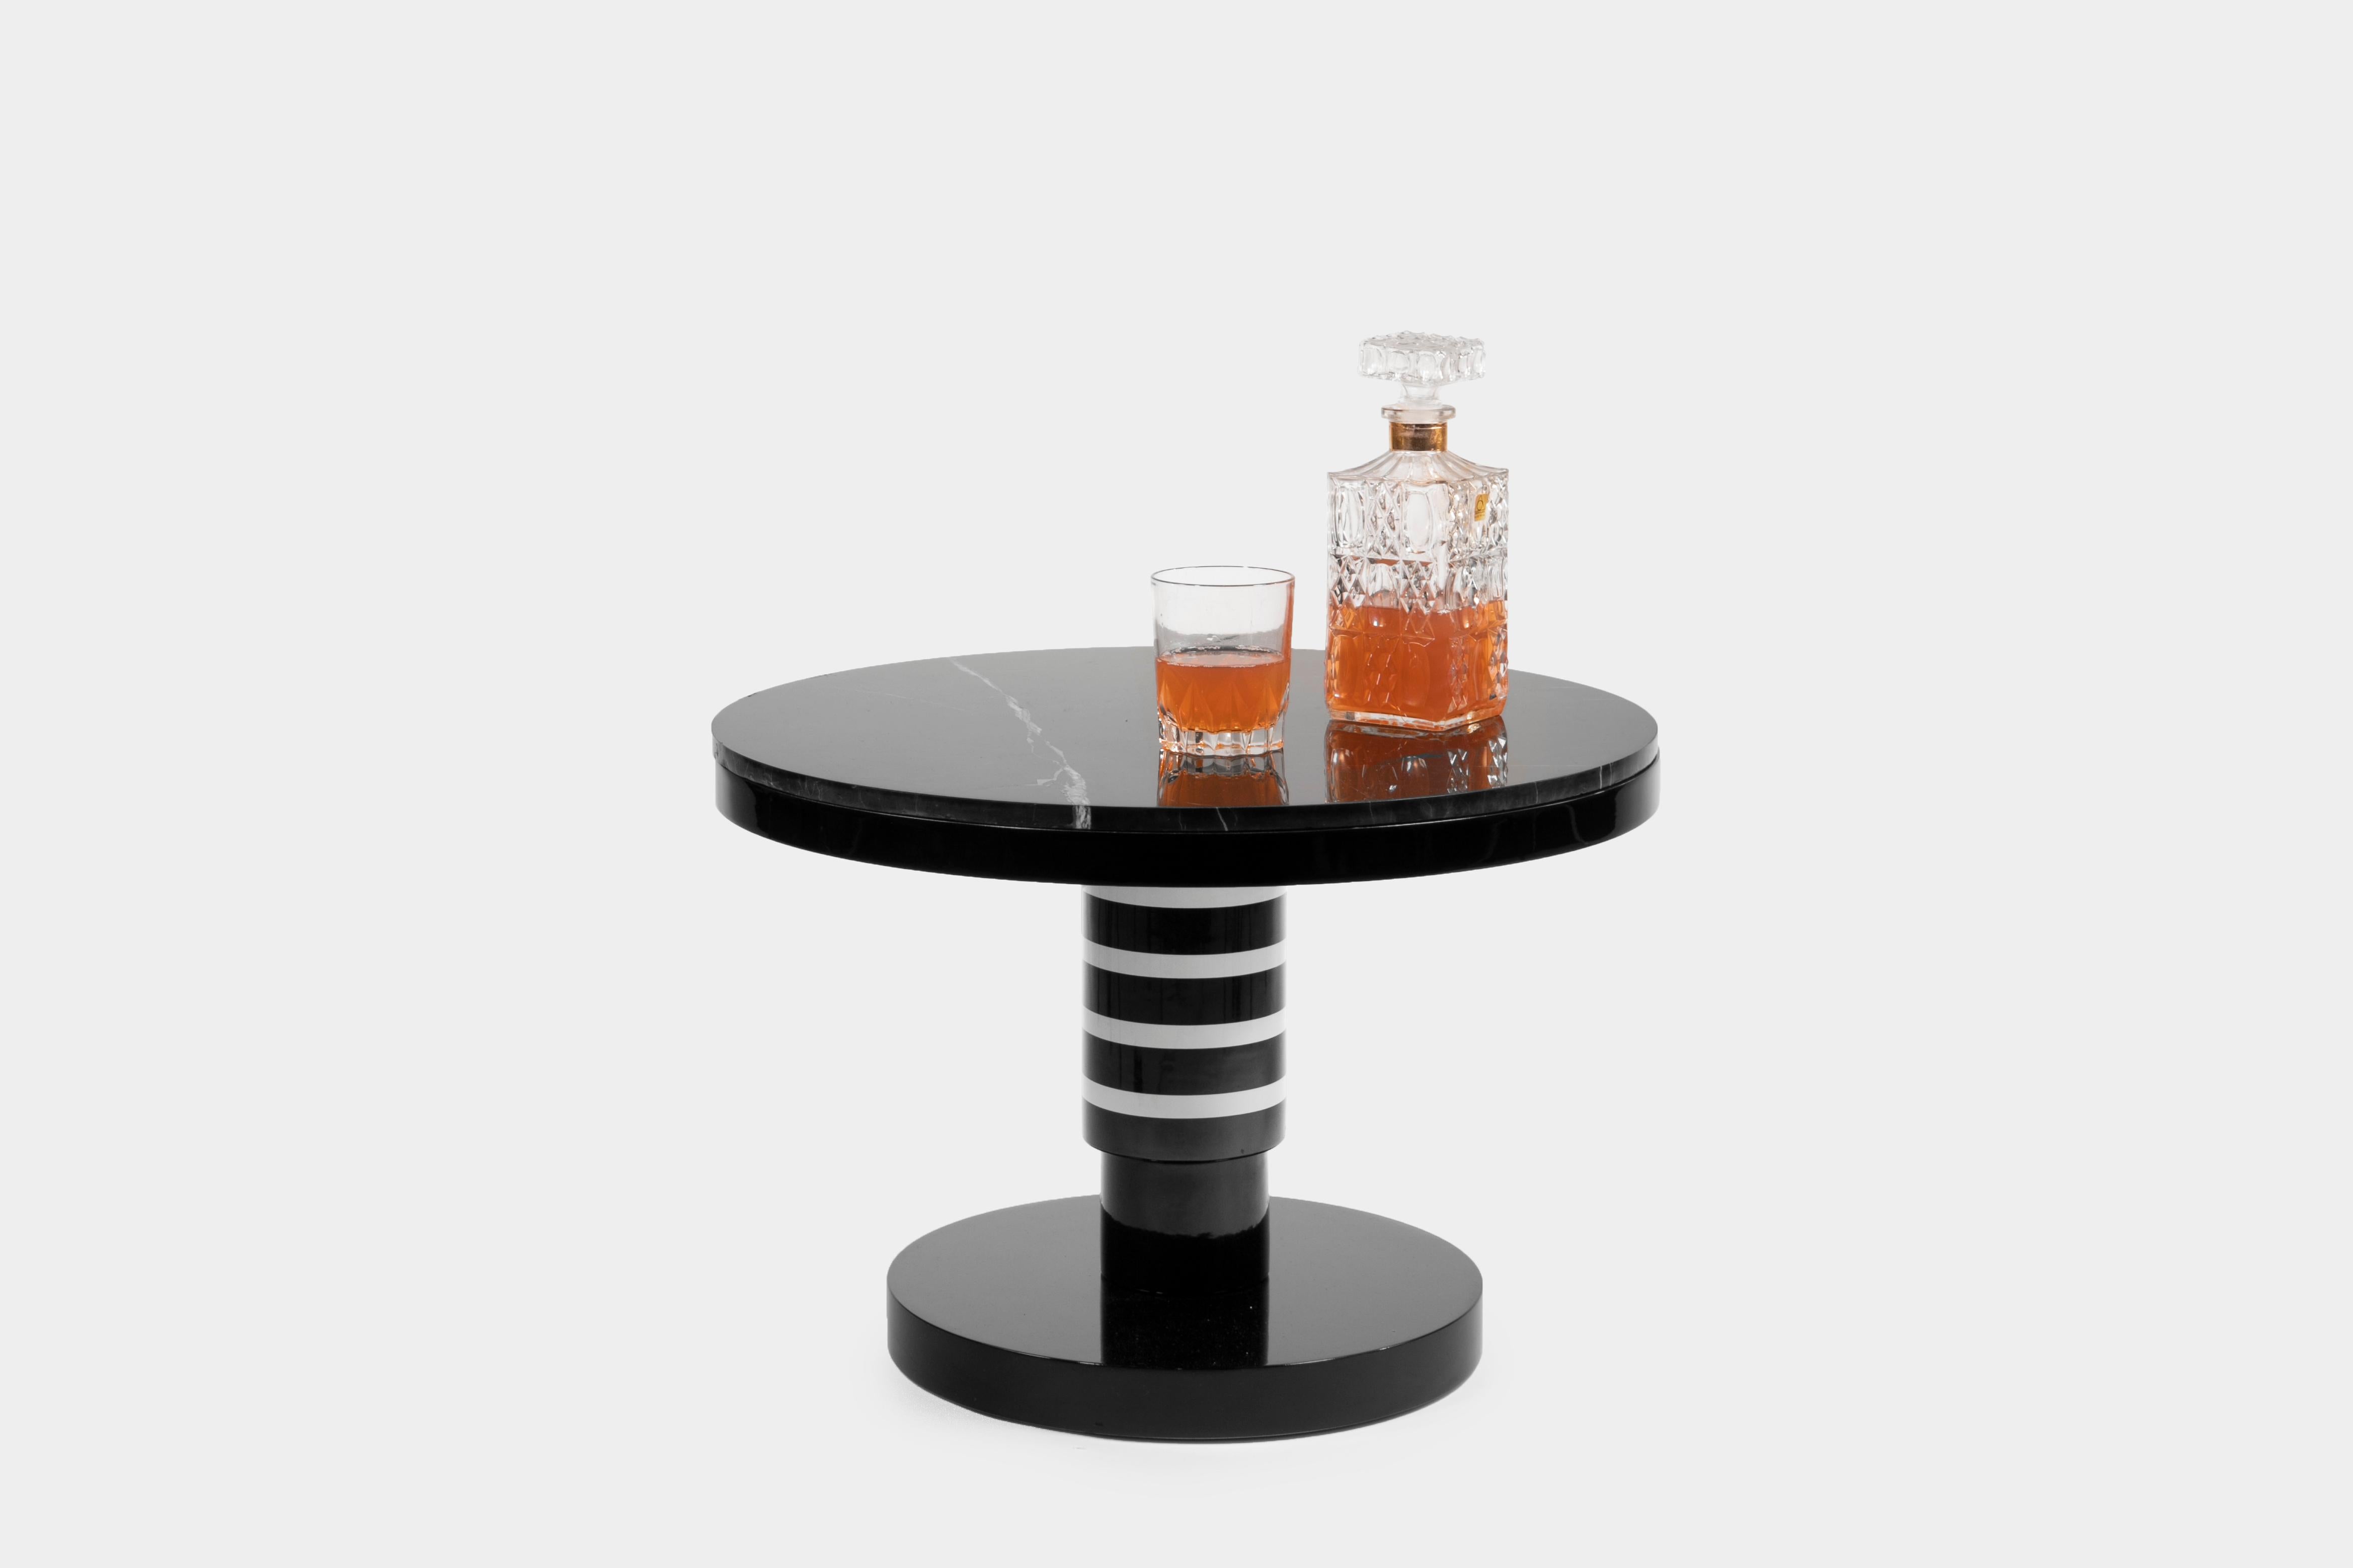 Small ceramic and marble coffee table by Eric Willemart

Materials: Handcrafted ceramic glazed in black, white and copper finishes
Base: Glazed ceramic on an aluminium plate
Top: Polished Nero Marquina marble, plate embedded in a